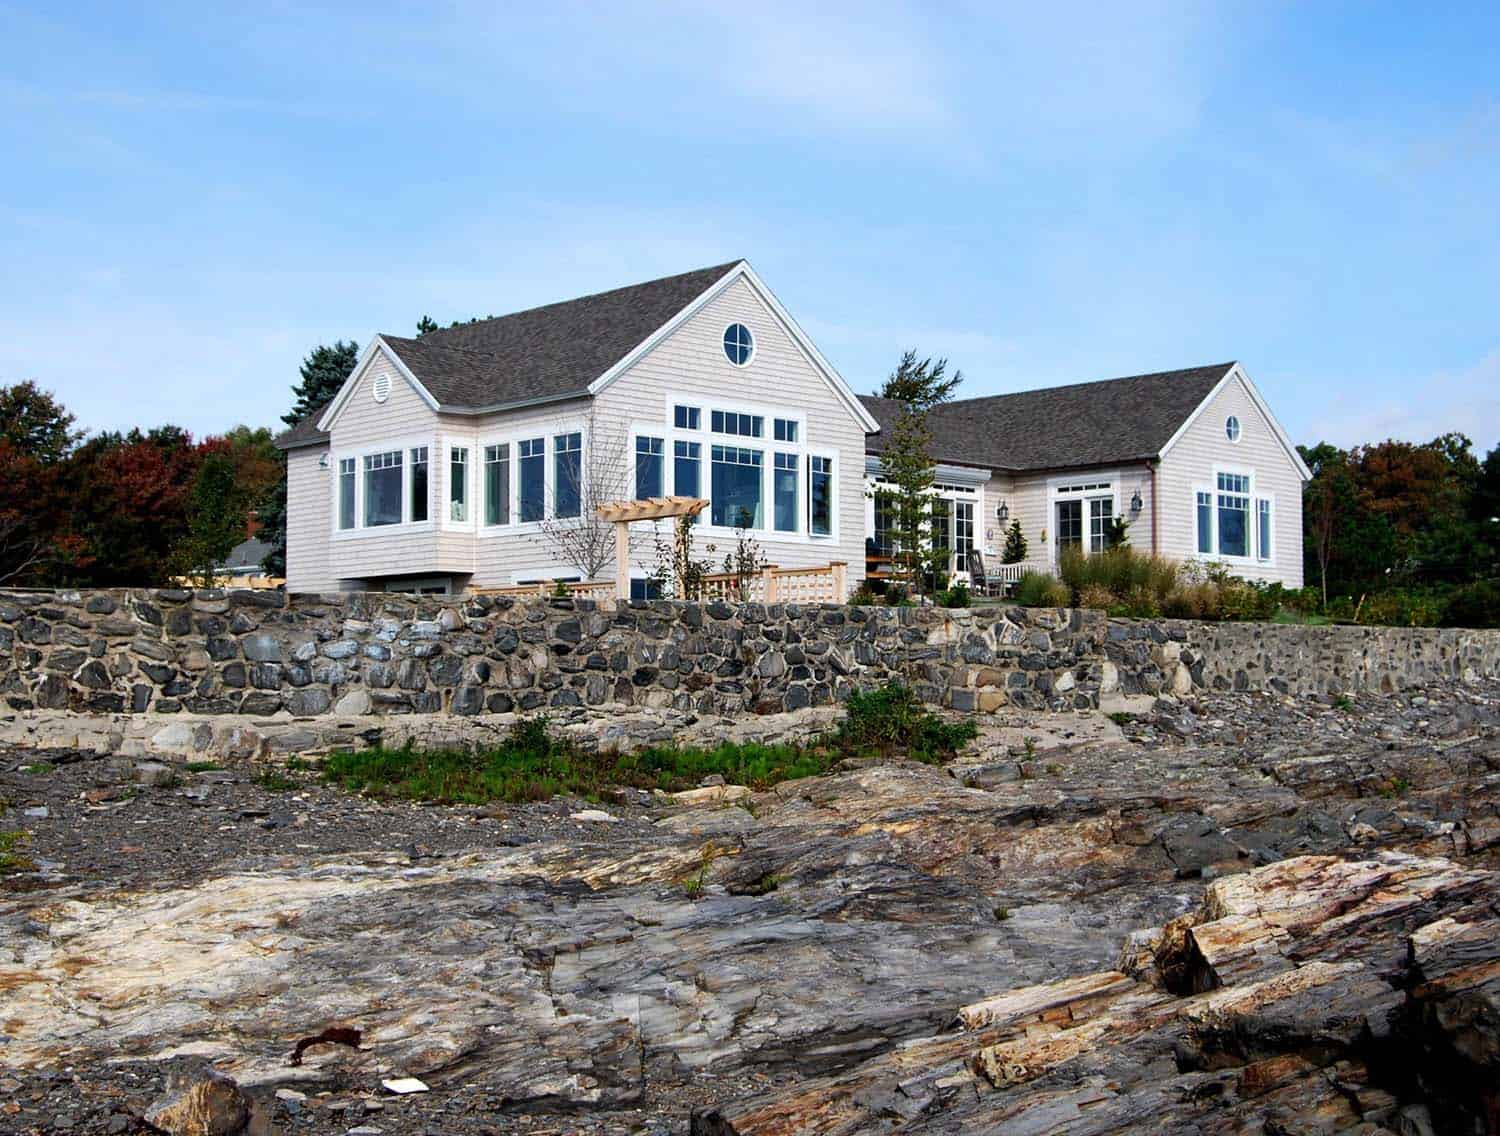 A simple yet elegantly styled seaside cottage in Maine